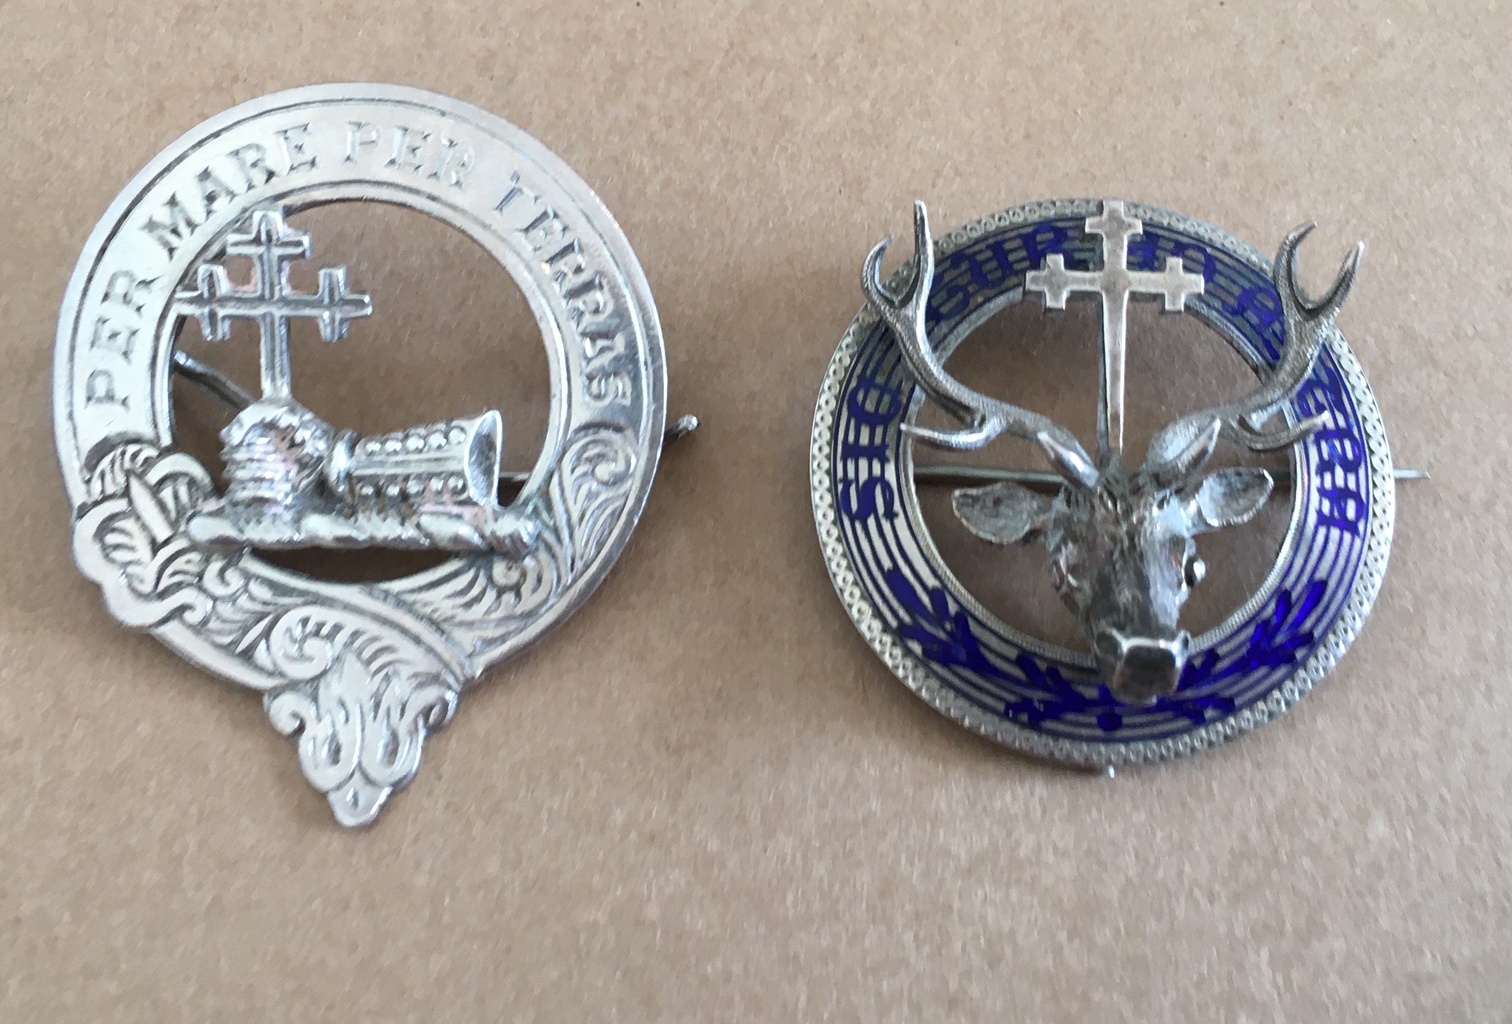 Lot of 2 Antique Scottish Clan Badges - one which is marked JF Inverness.